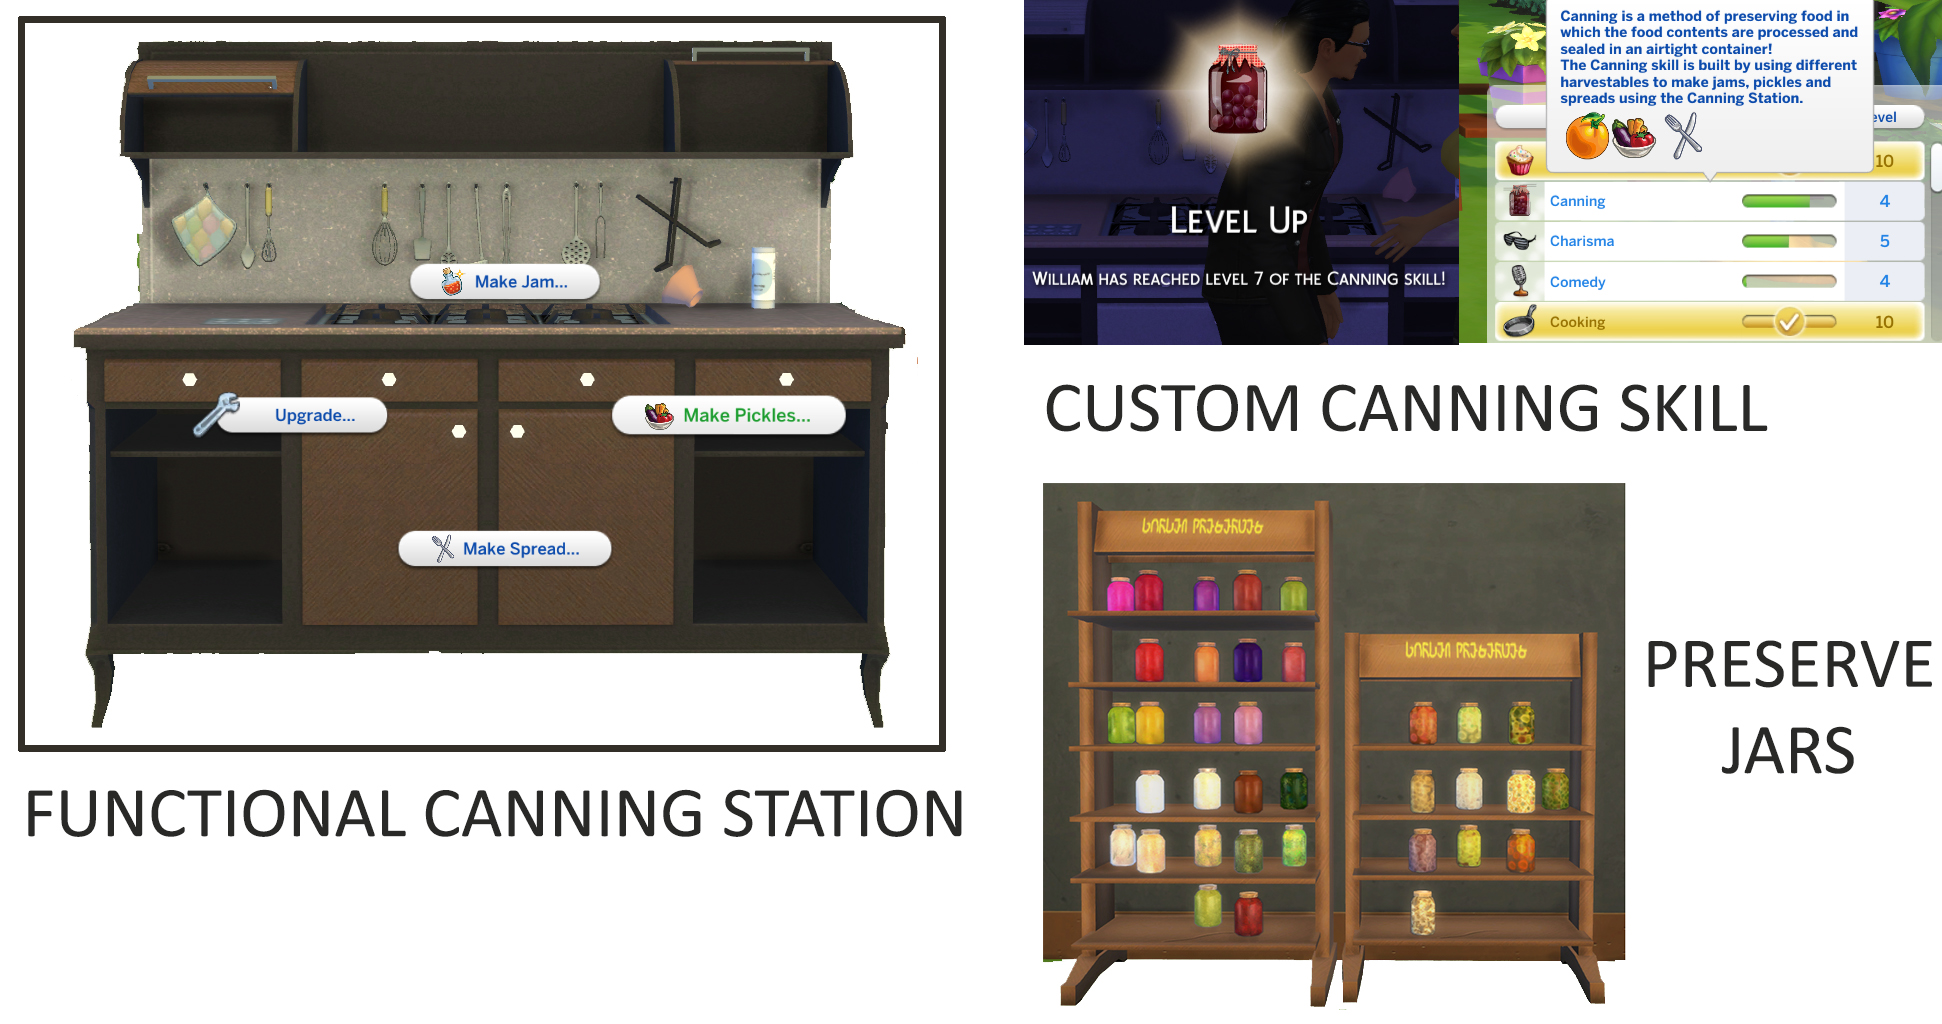 Functional Canning Station & Custom Canning Skill